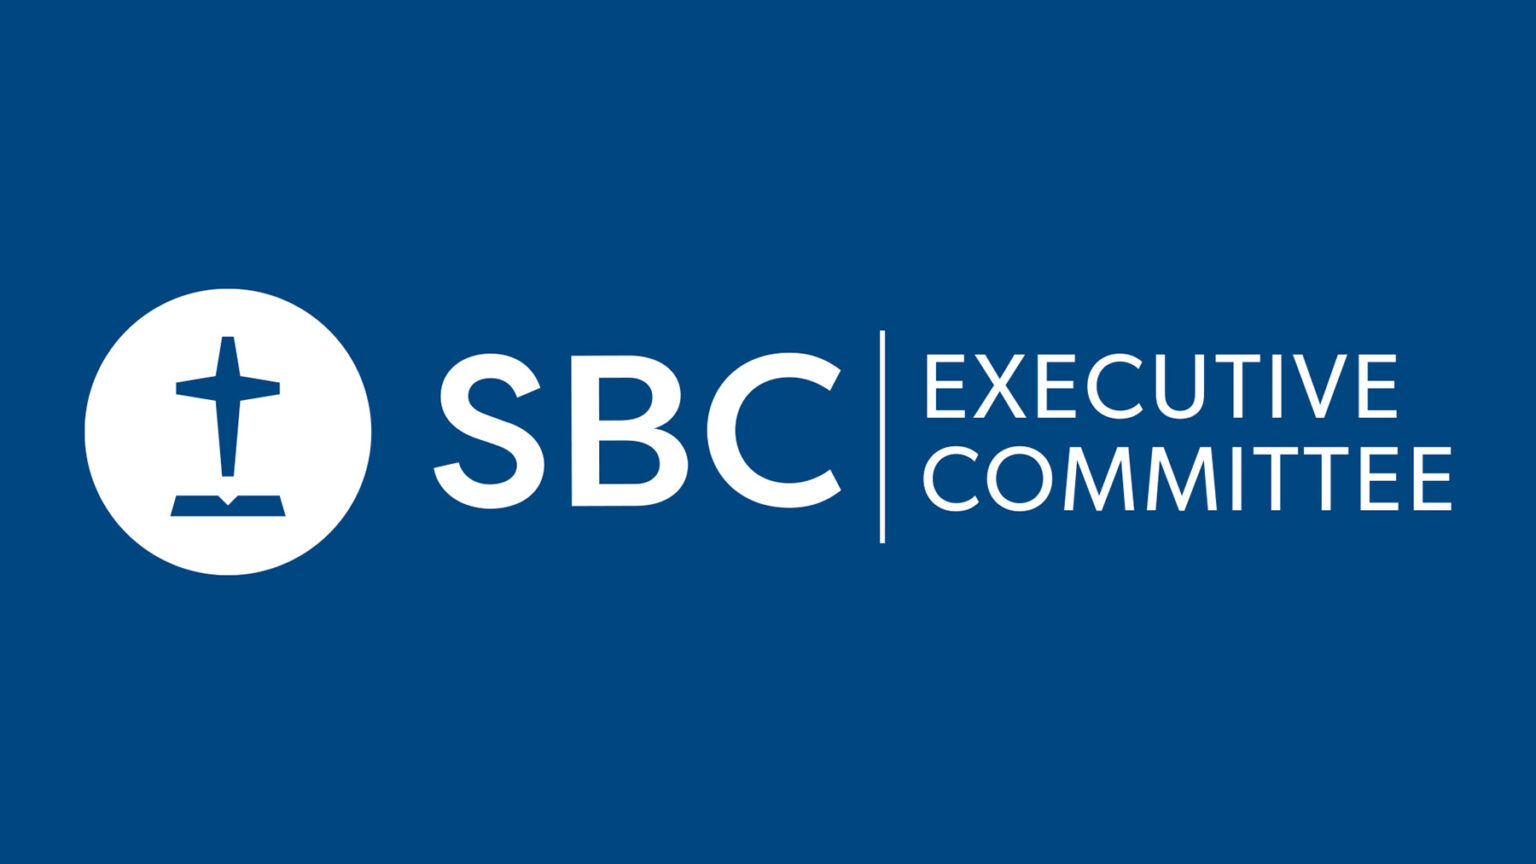 SBC Executive Committee opposes proposed constitutional amendment on